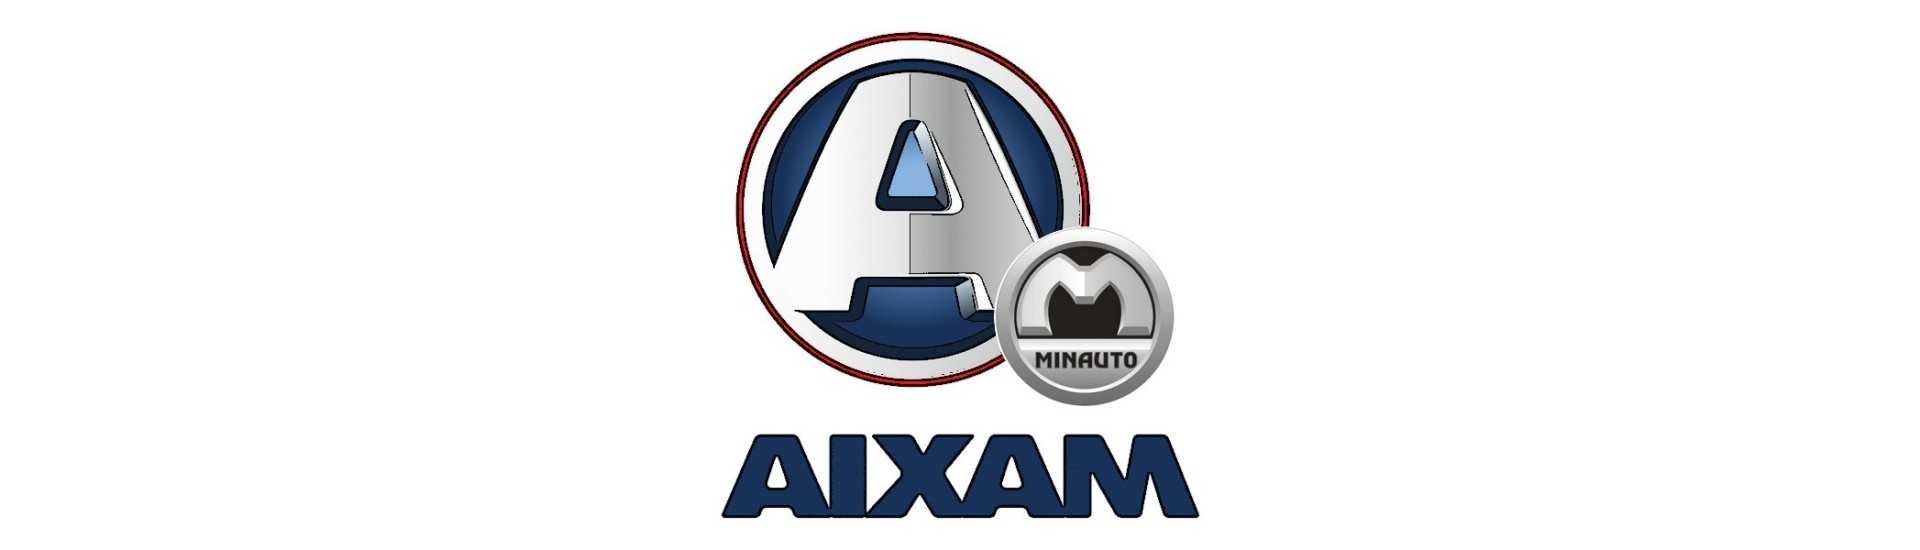 Sunset at best price for car without a permit Aixam Minauto